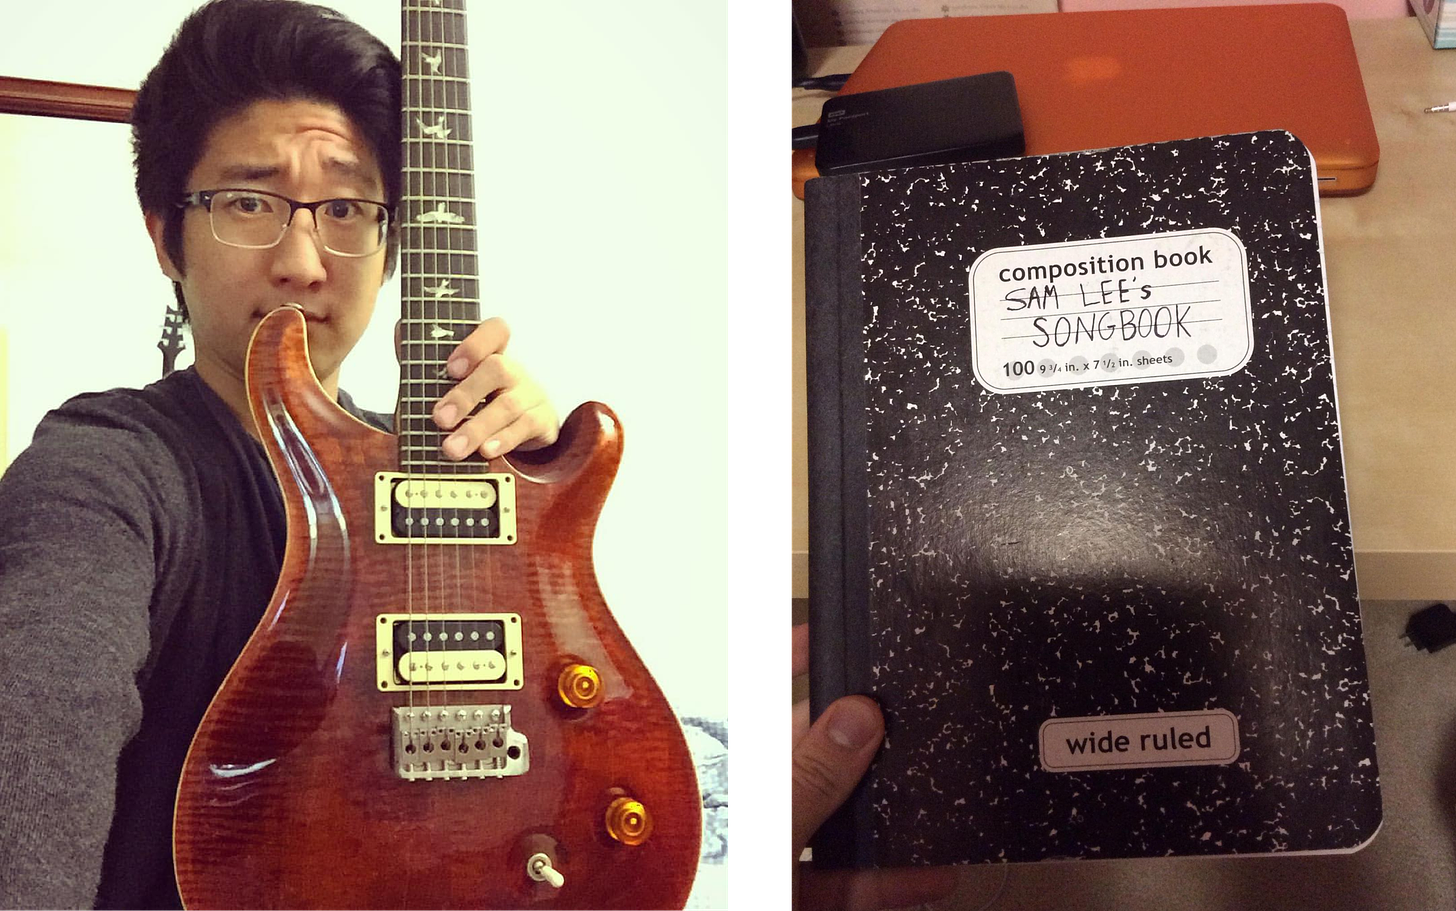 Sam in high school holding a guitar and a second image on right holding an old composition book of Sam's songs.